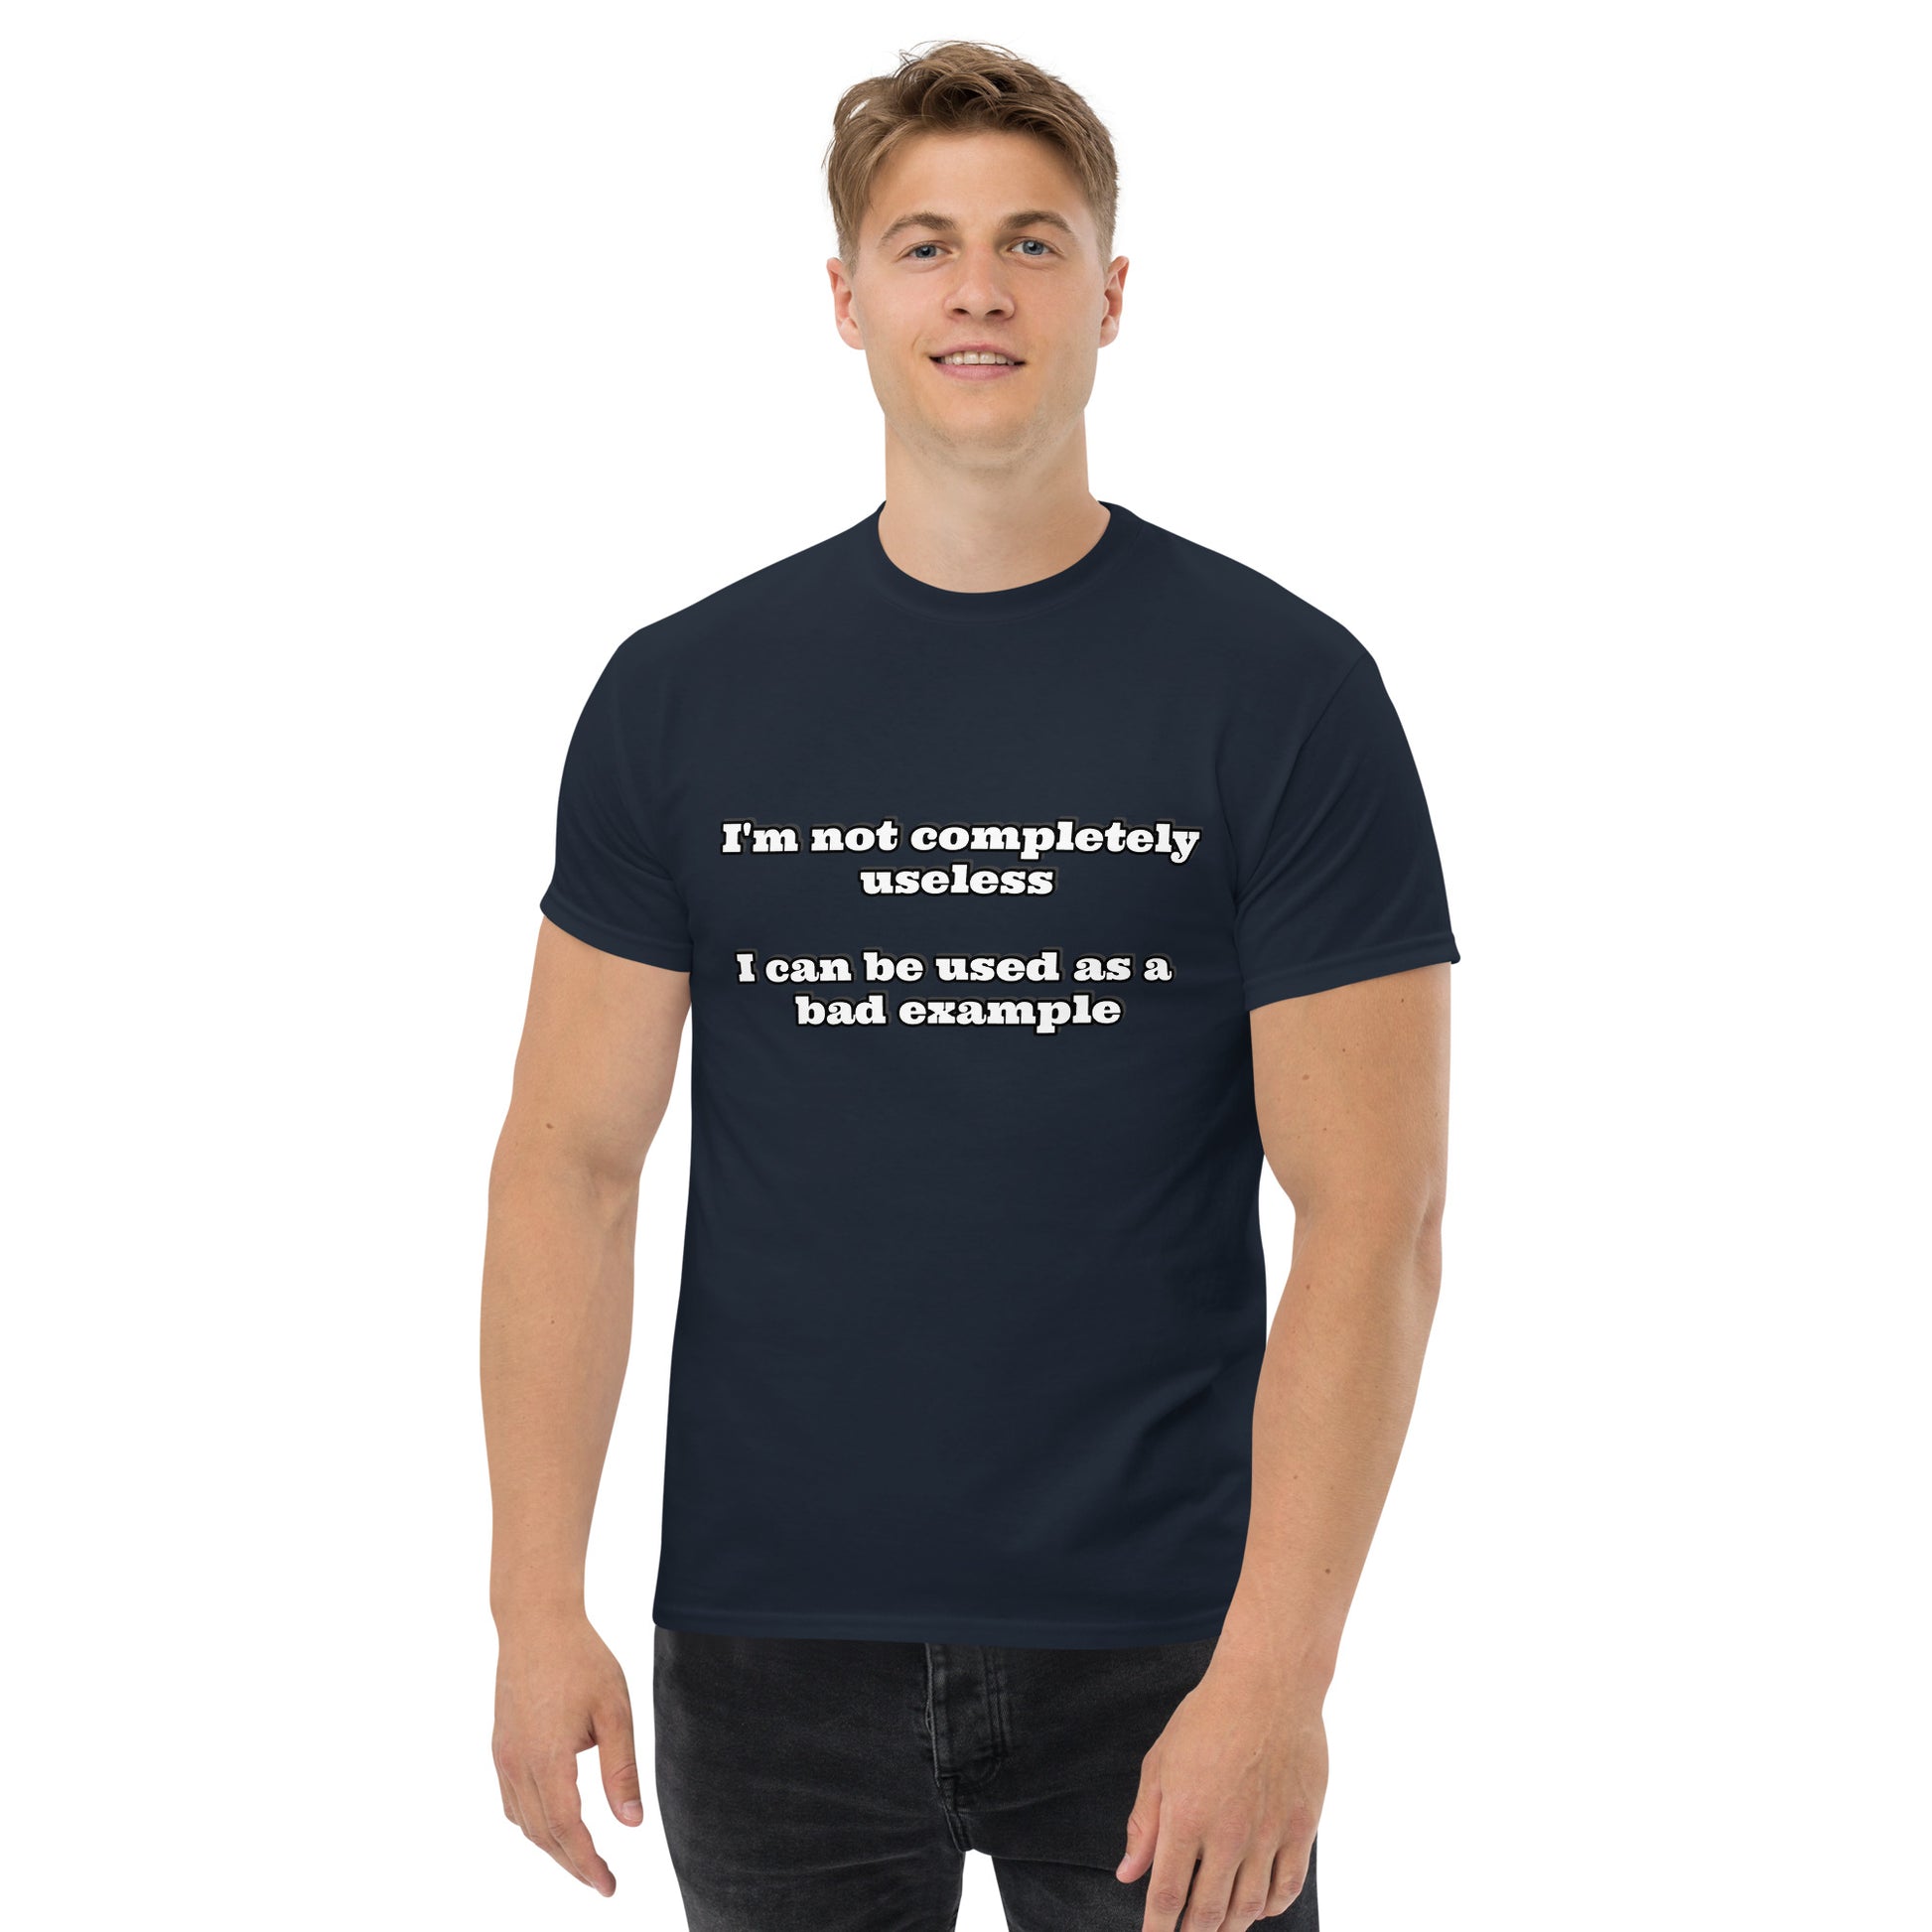 Men with navy blue t-shirt with text “I'm not completely useless I can be used as a bad example”